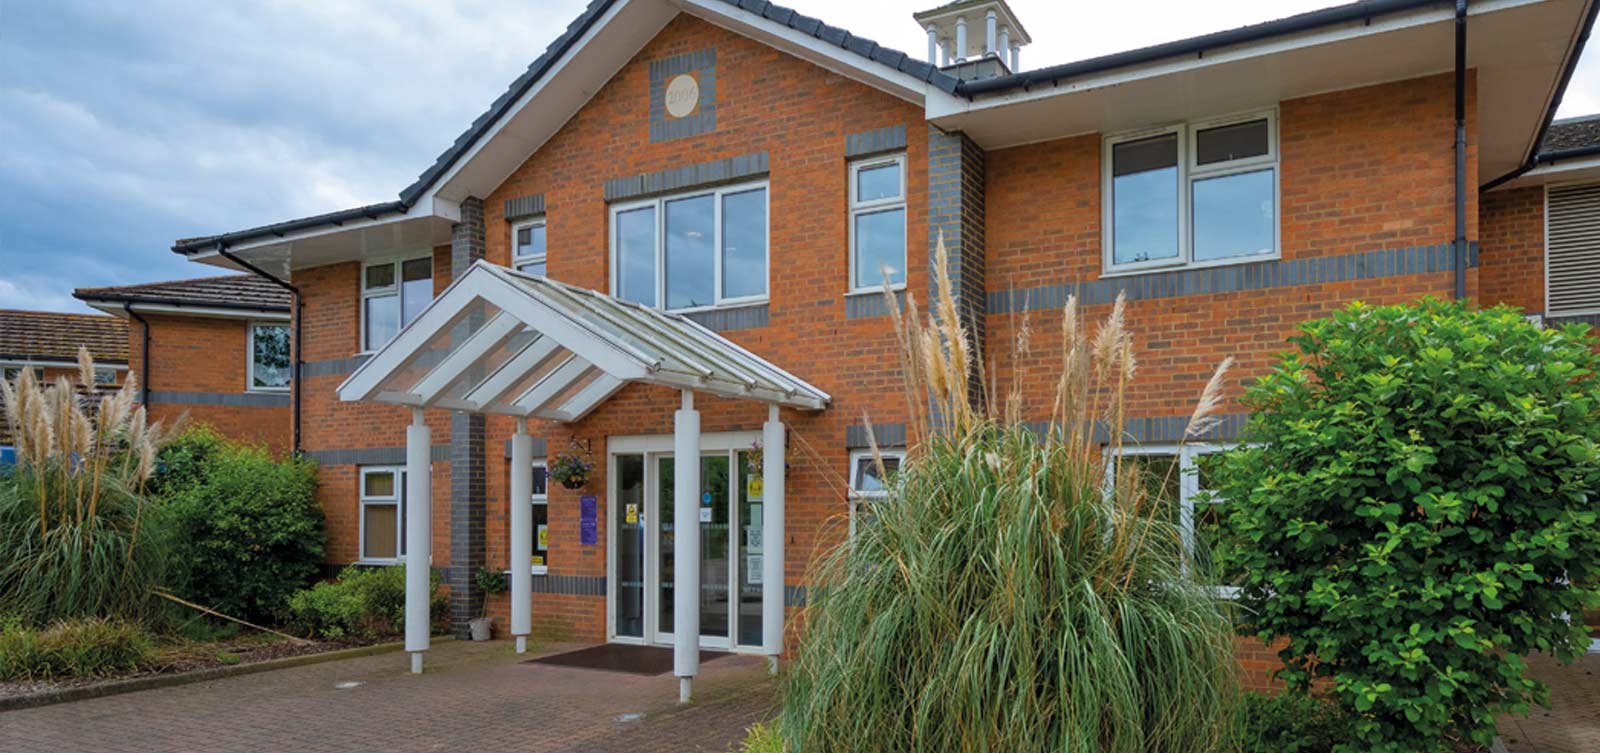 Northbourne Court Care Home in Sidcup